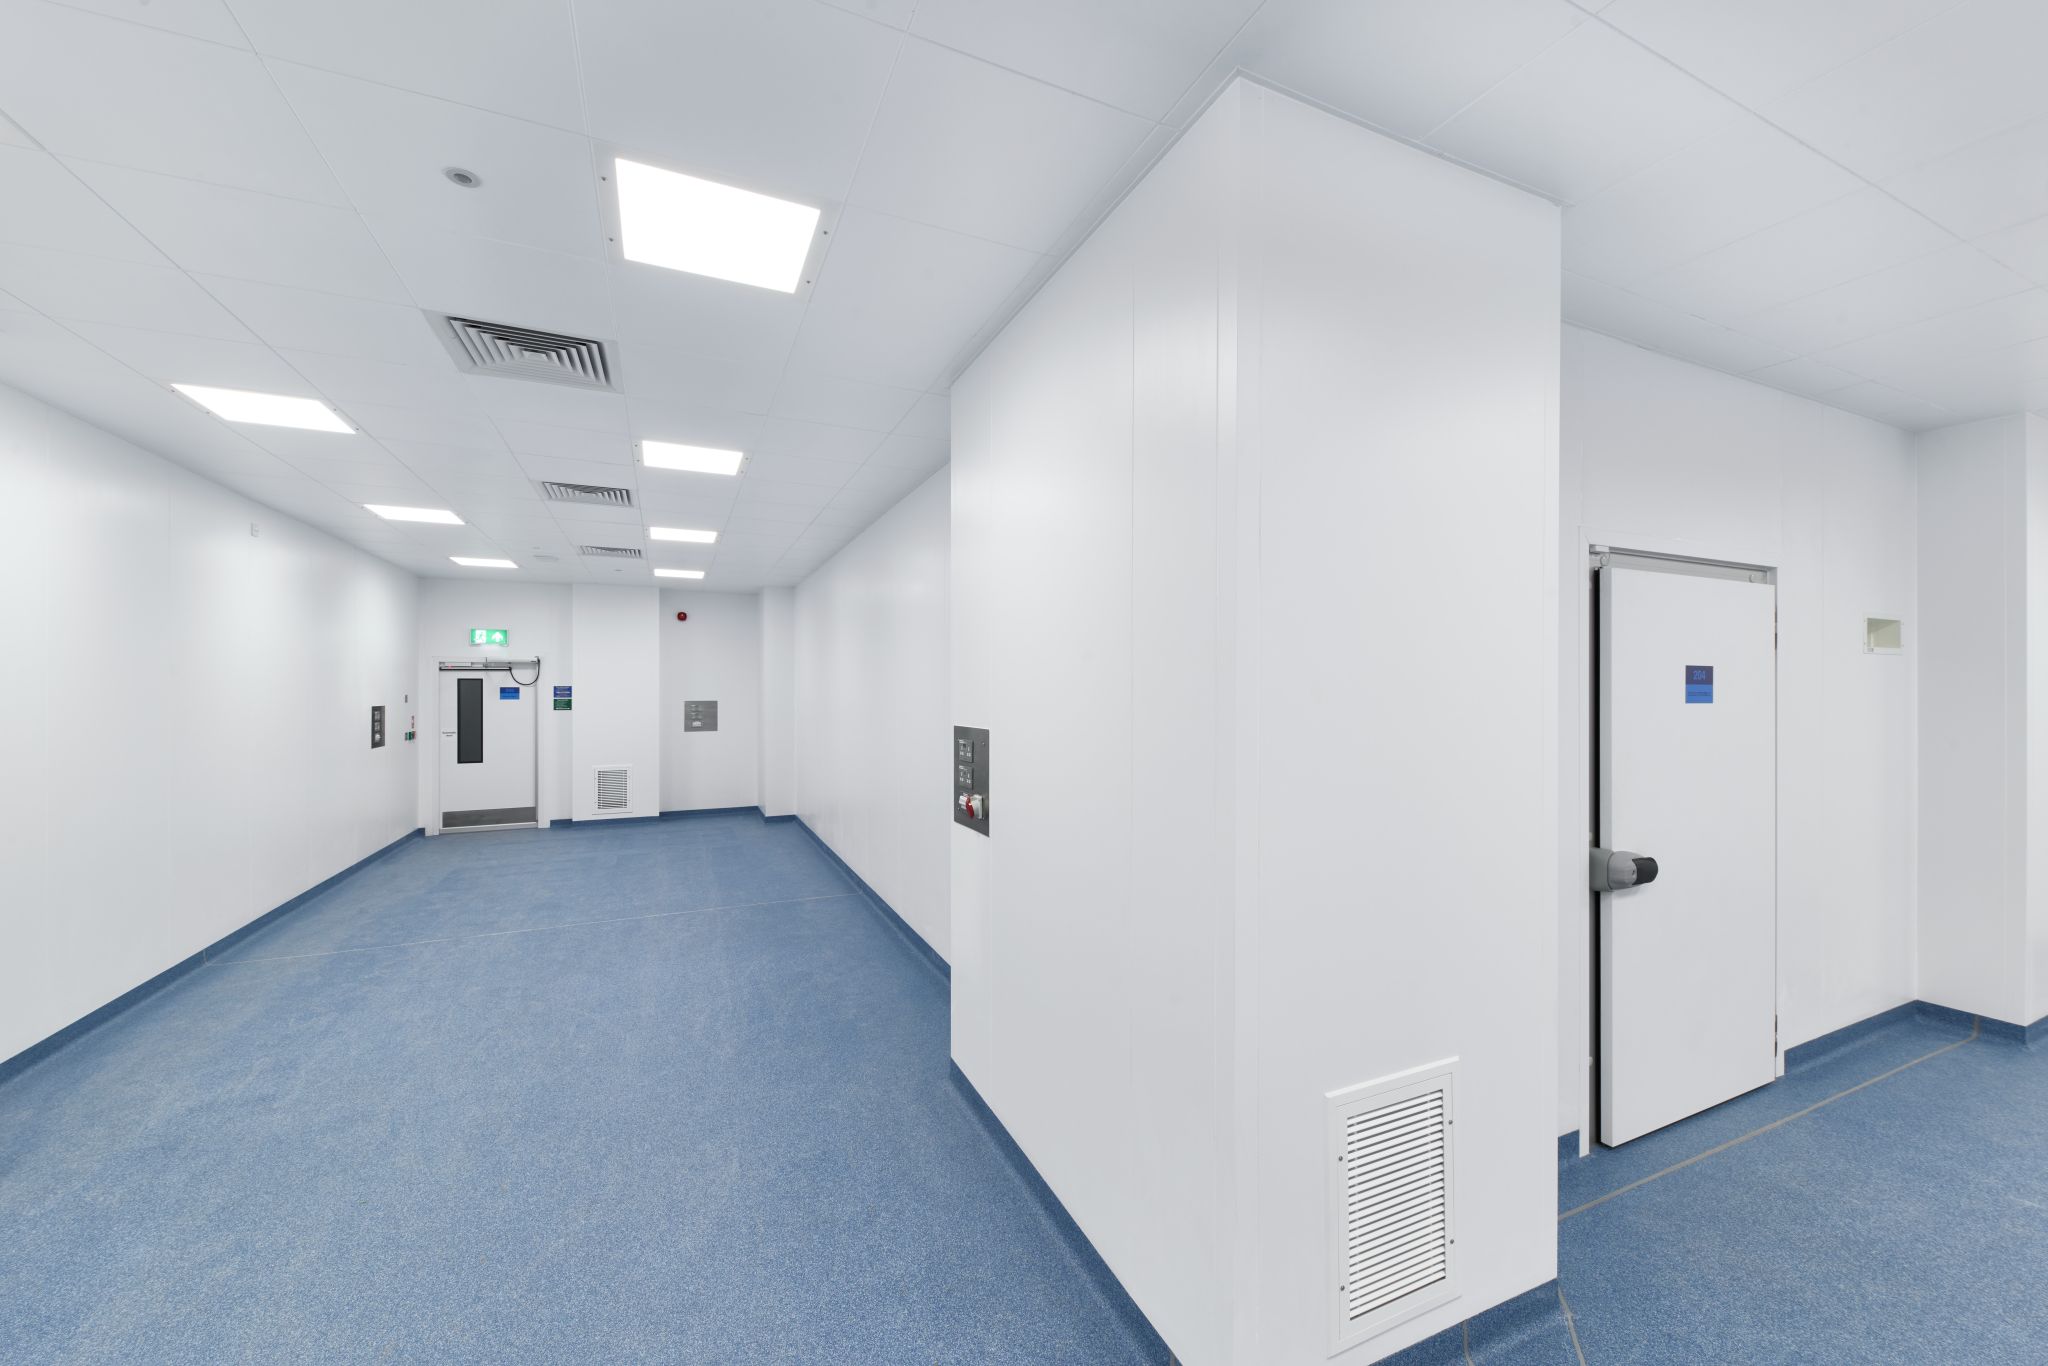 Norwood completes compliant biotech cleanroom